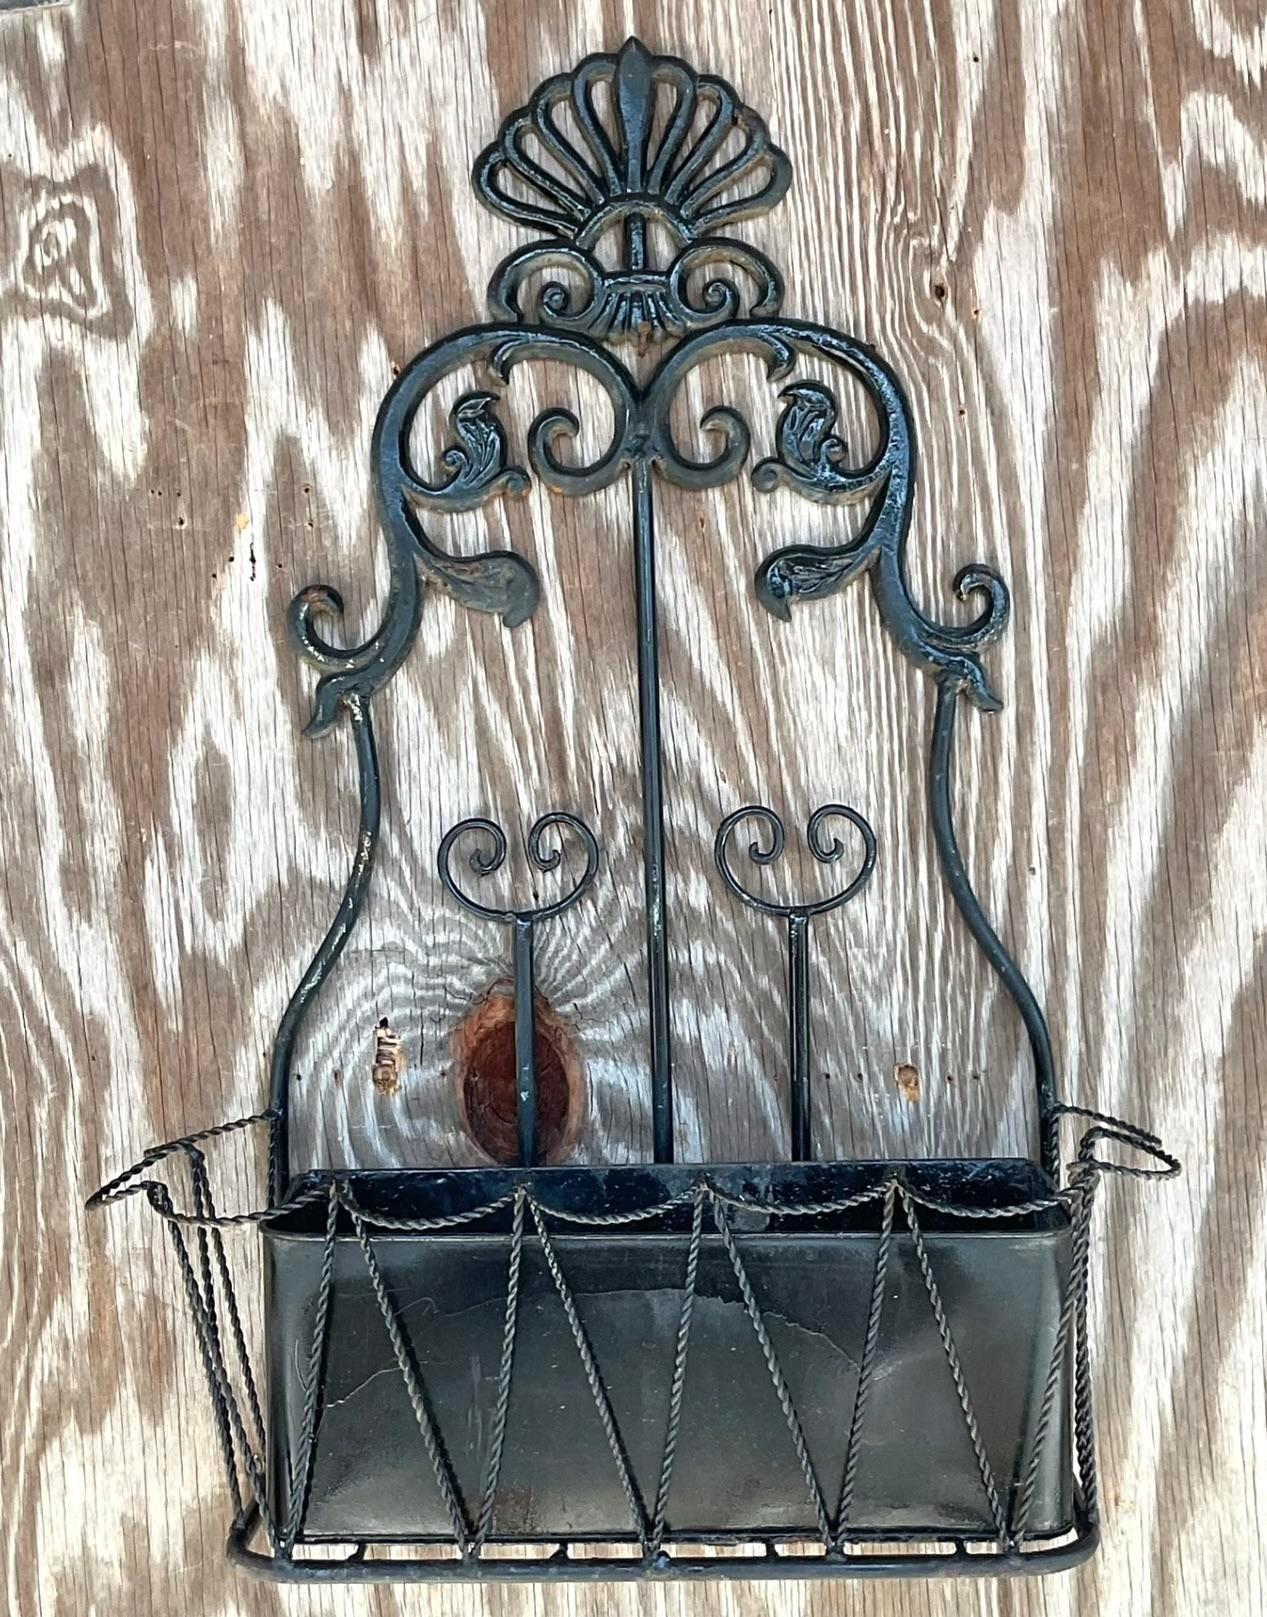 A fantastic vintage Boho wall planter. A chic scroll design in black wrought iron. A generous pocket for your favorite flowers, shells or pine cones. You decide! Perfect indoors or outside in a covered area. Acquired from a Palm Beach estate.